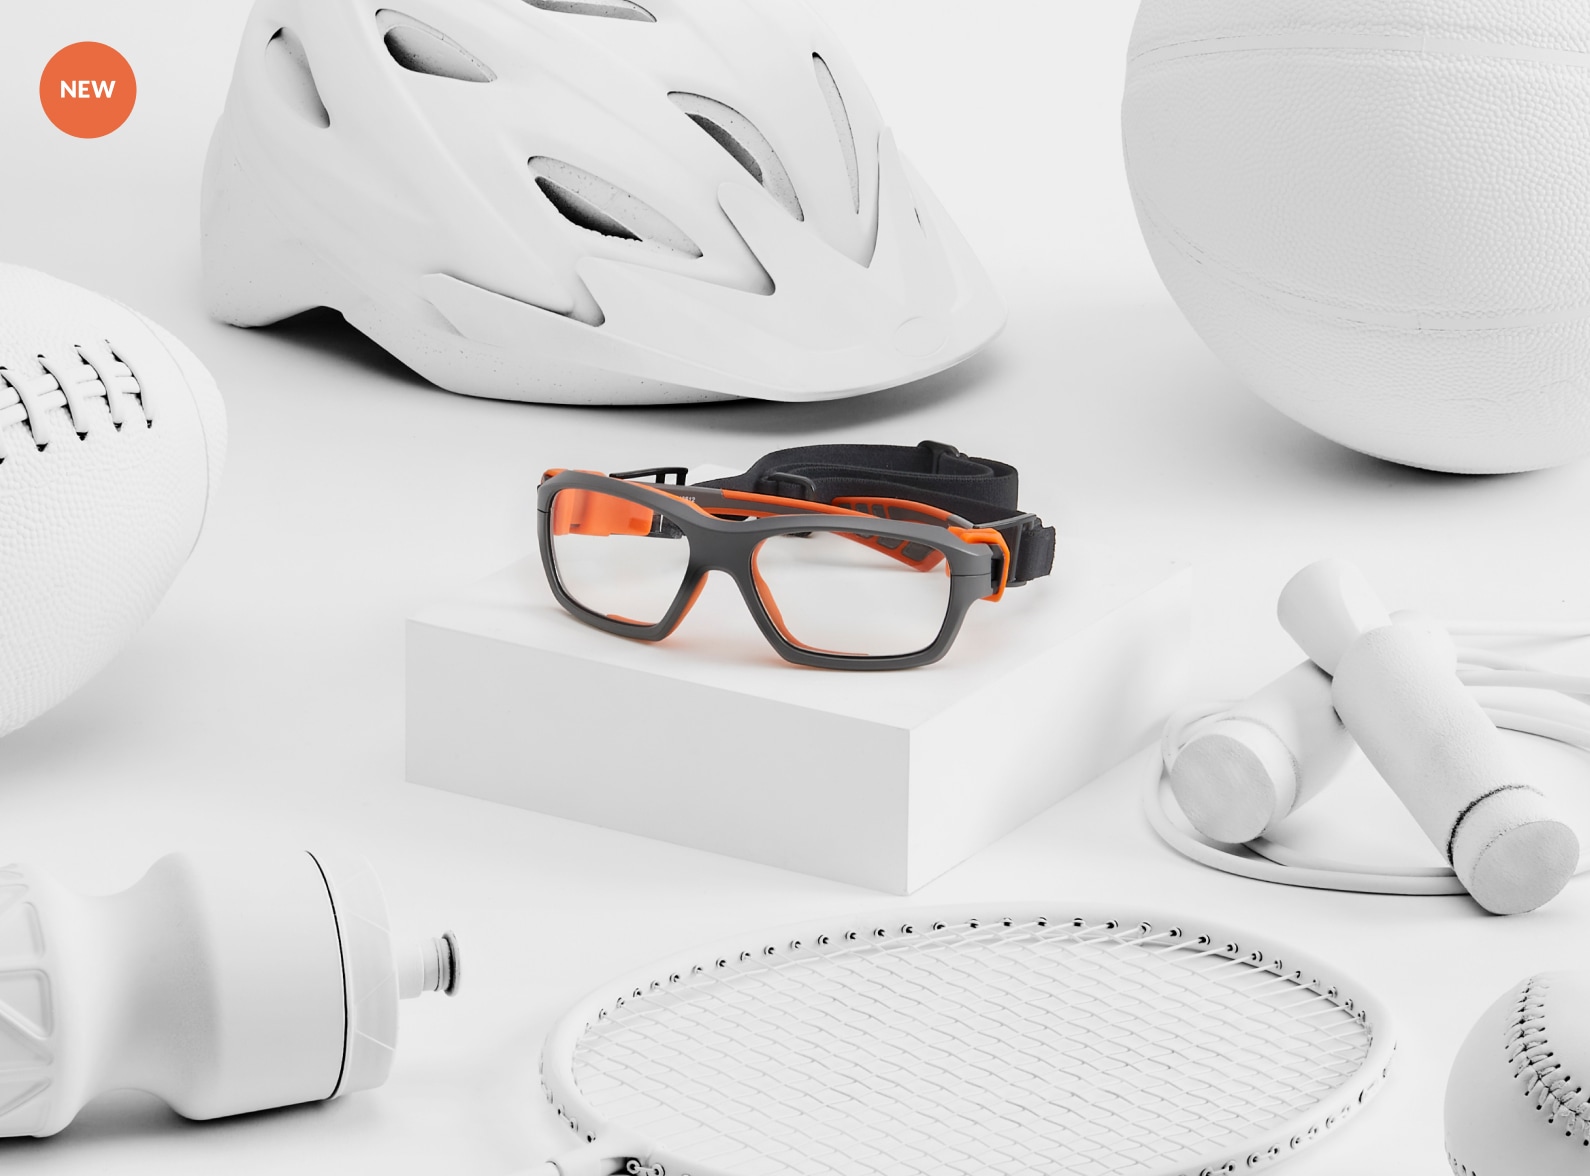 New. Image of Sports Protective Goggles #743512 on a white platform, surrounded by sports paraphernalia that are painted white.